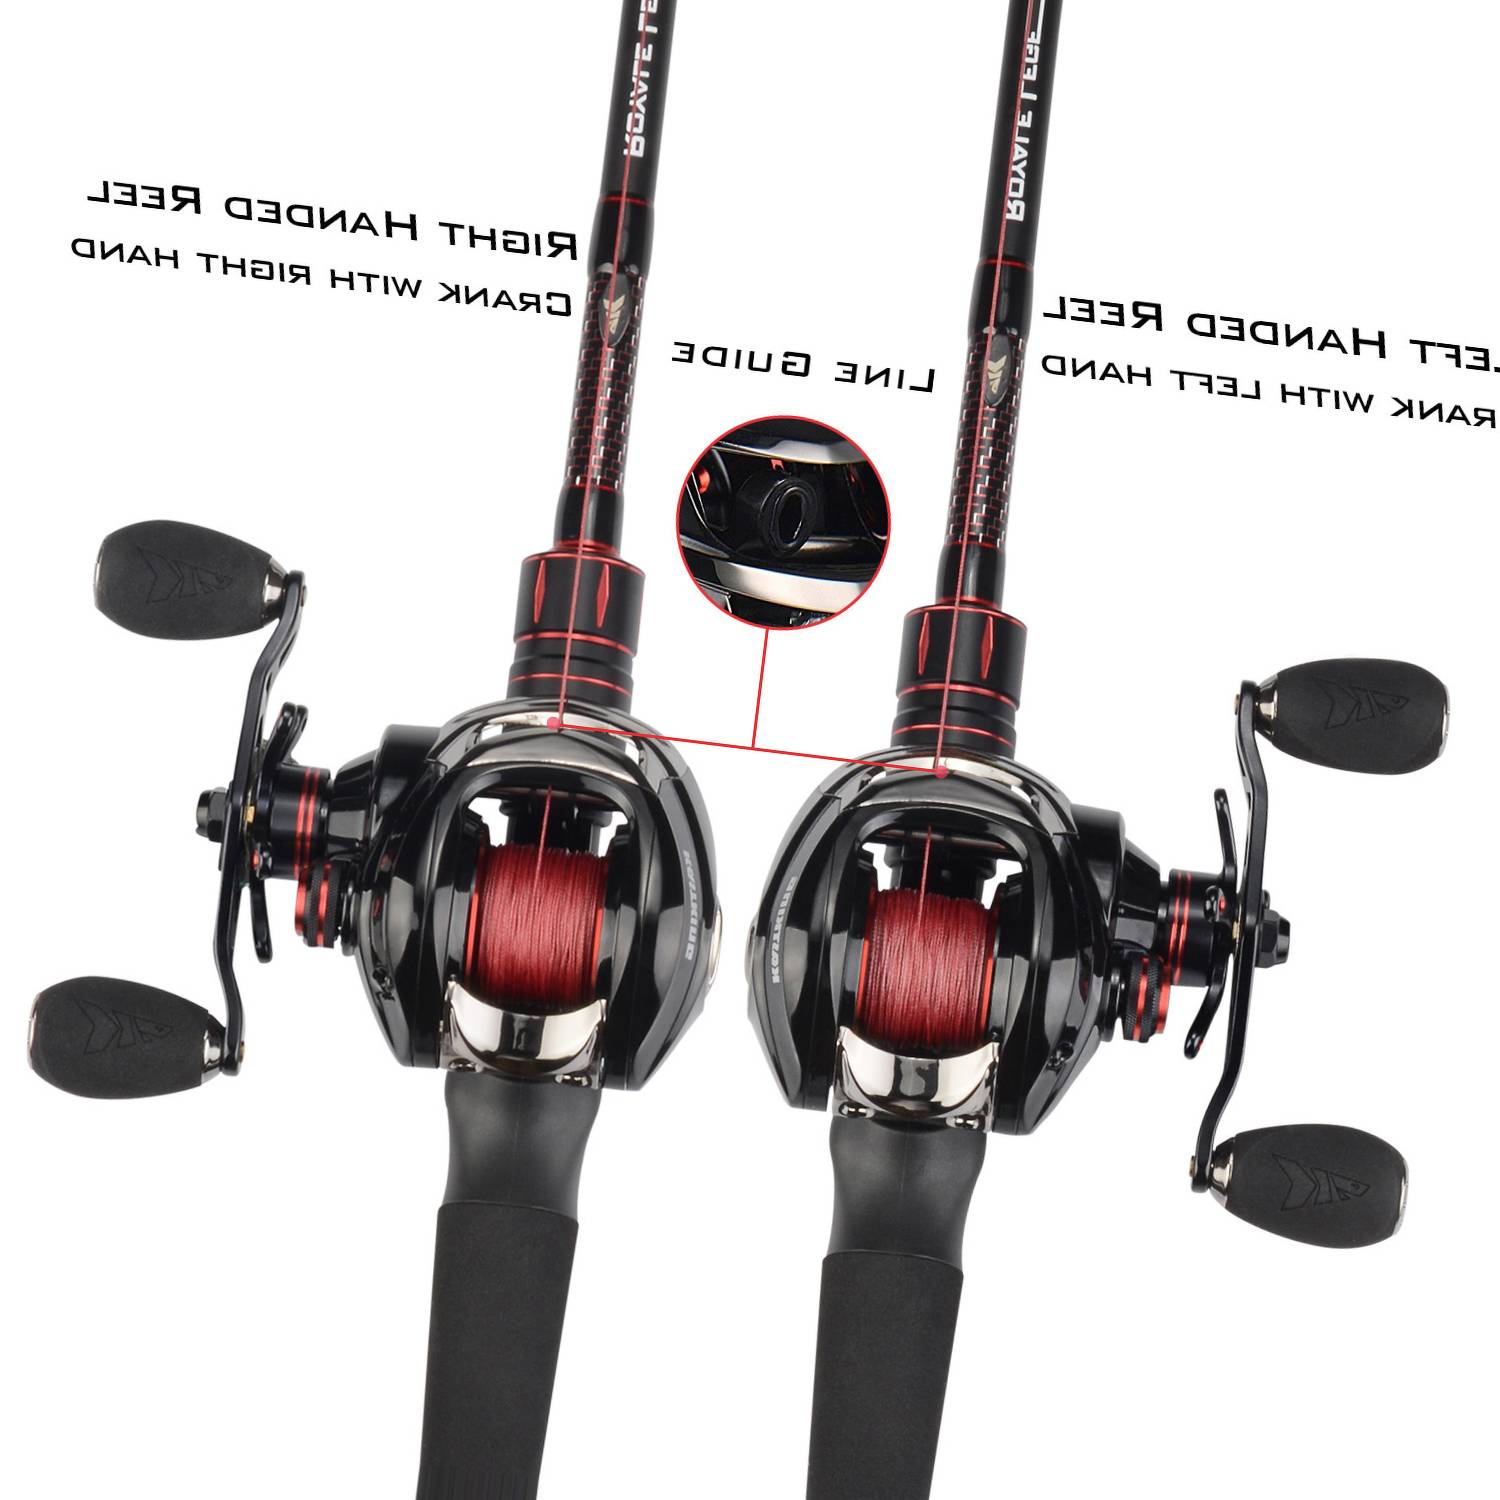 Best 7 inexpensive casting reels in 2019